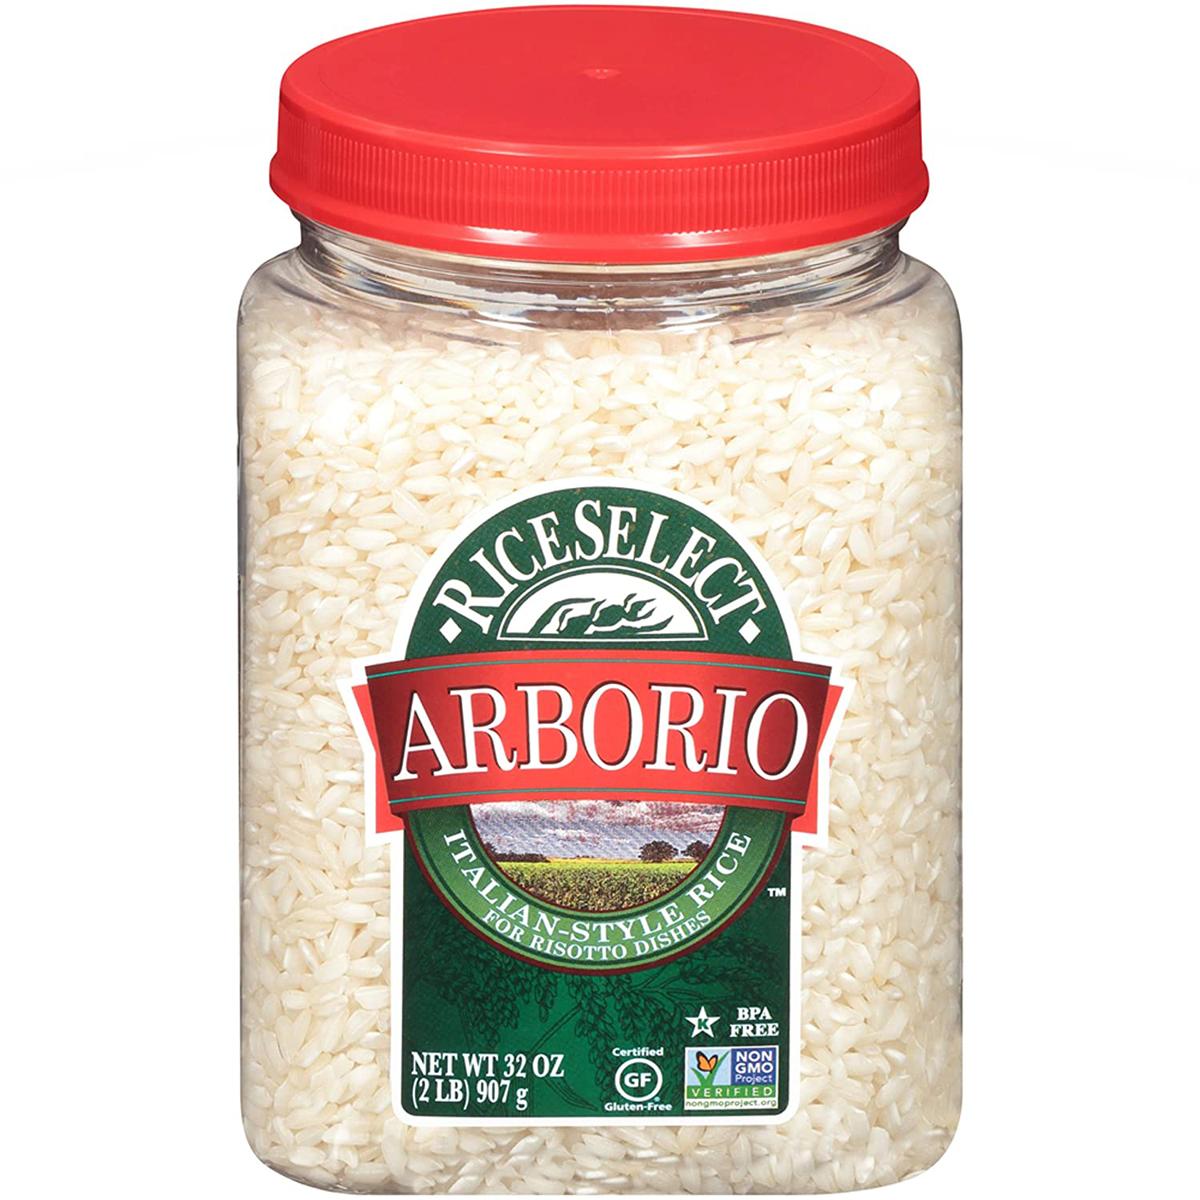 4 RiceSelect Arborio Rice Jars for $12.20 Shipped